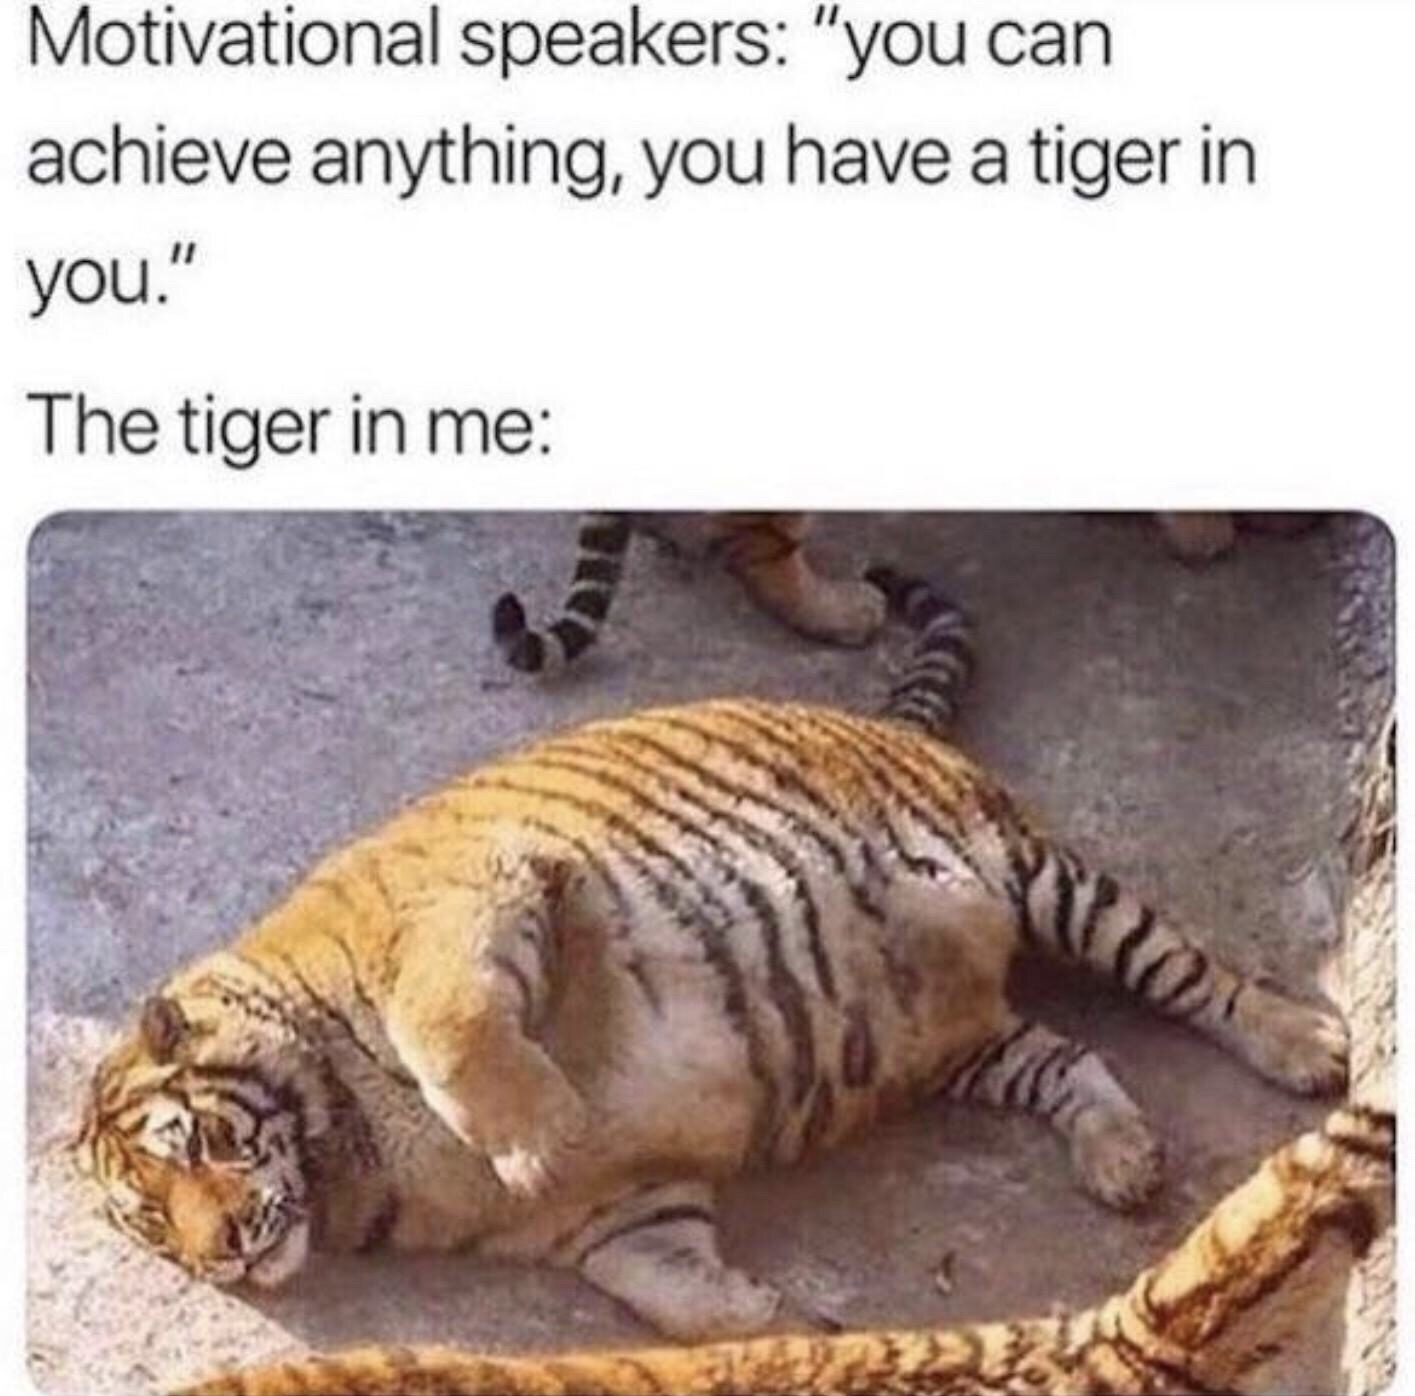 motivational speakers meme - Motivational speakers "you can achieve anything, you have a tiger in you." The tiger in me